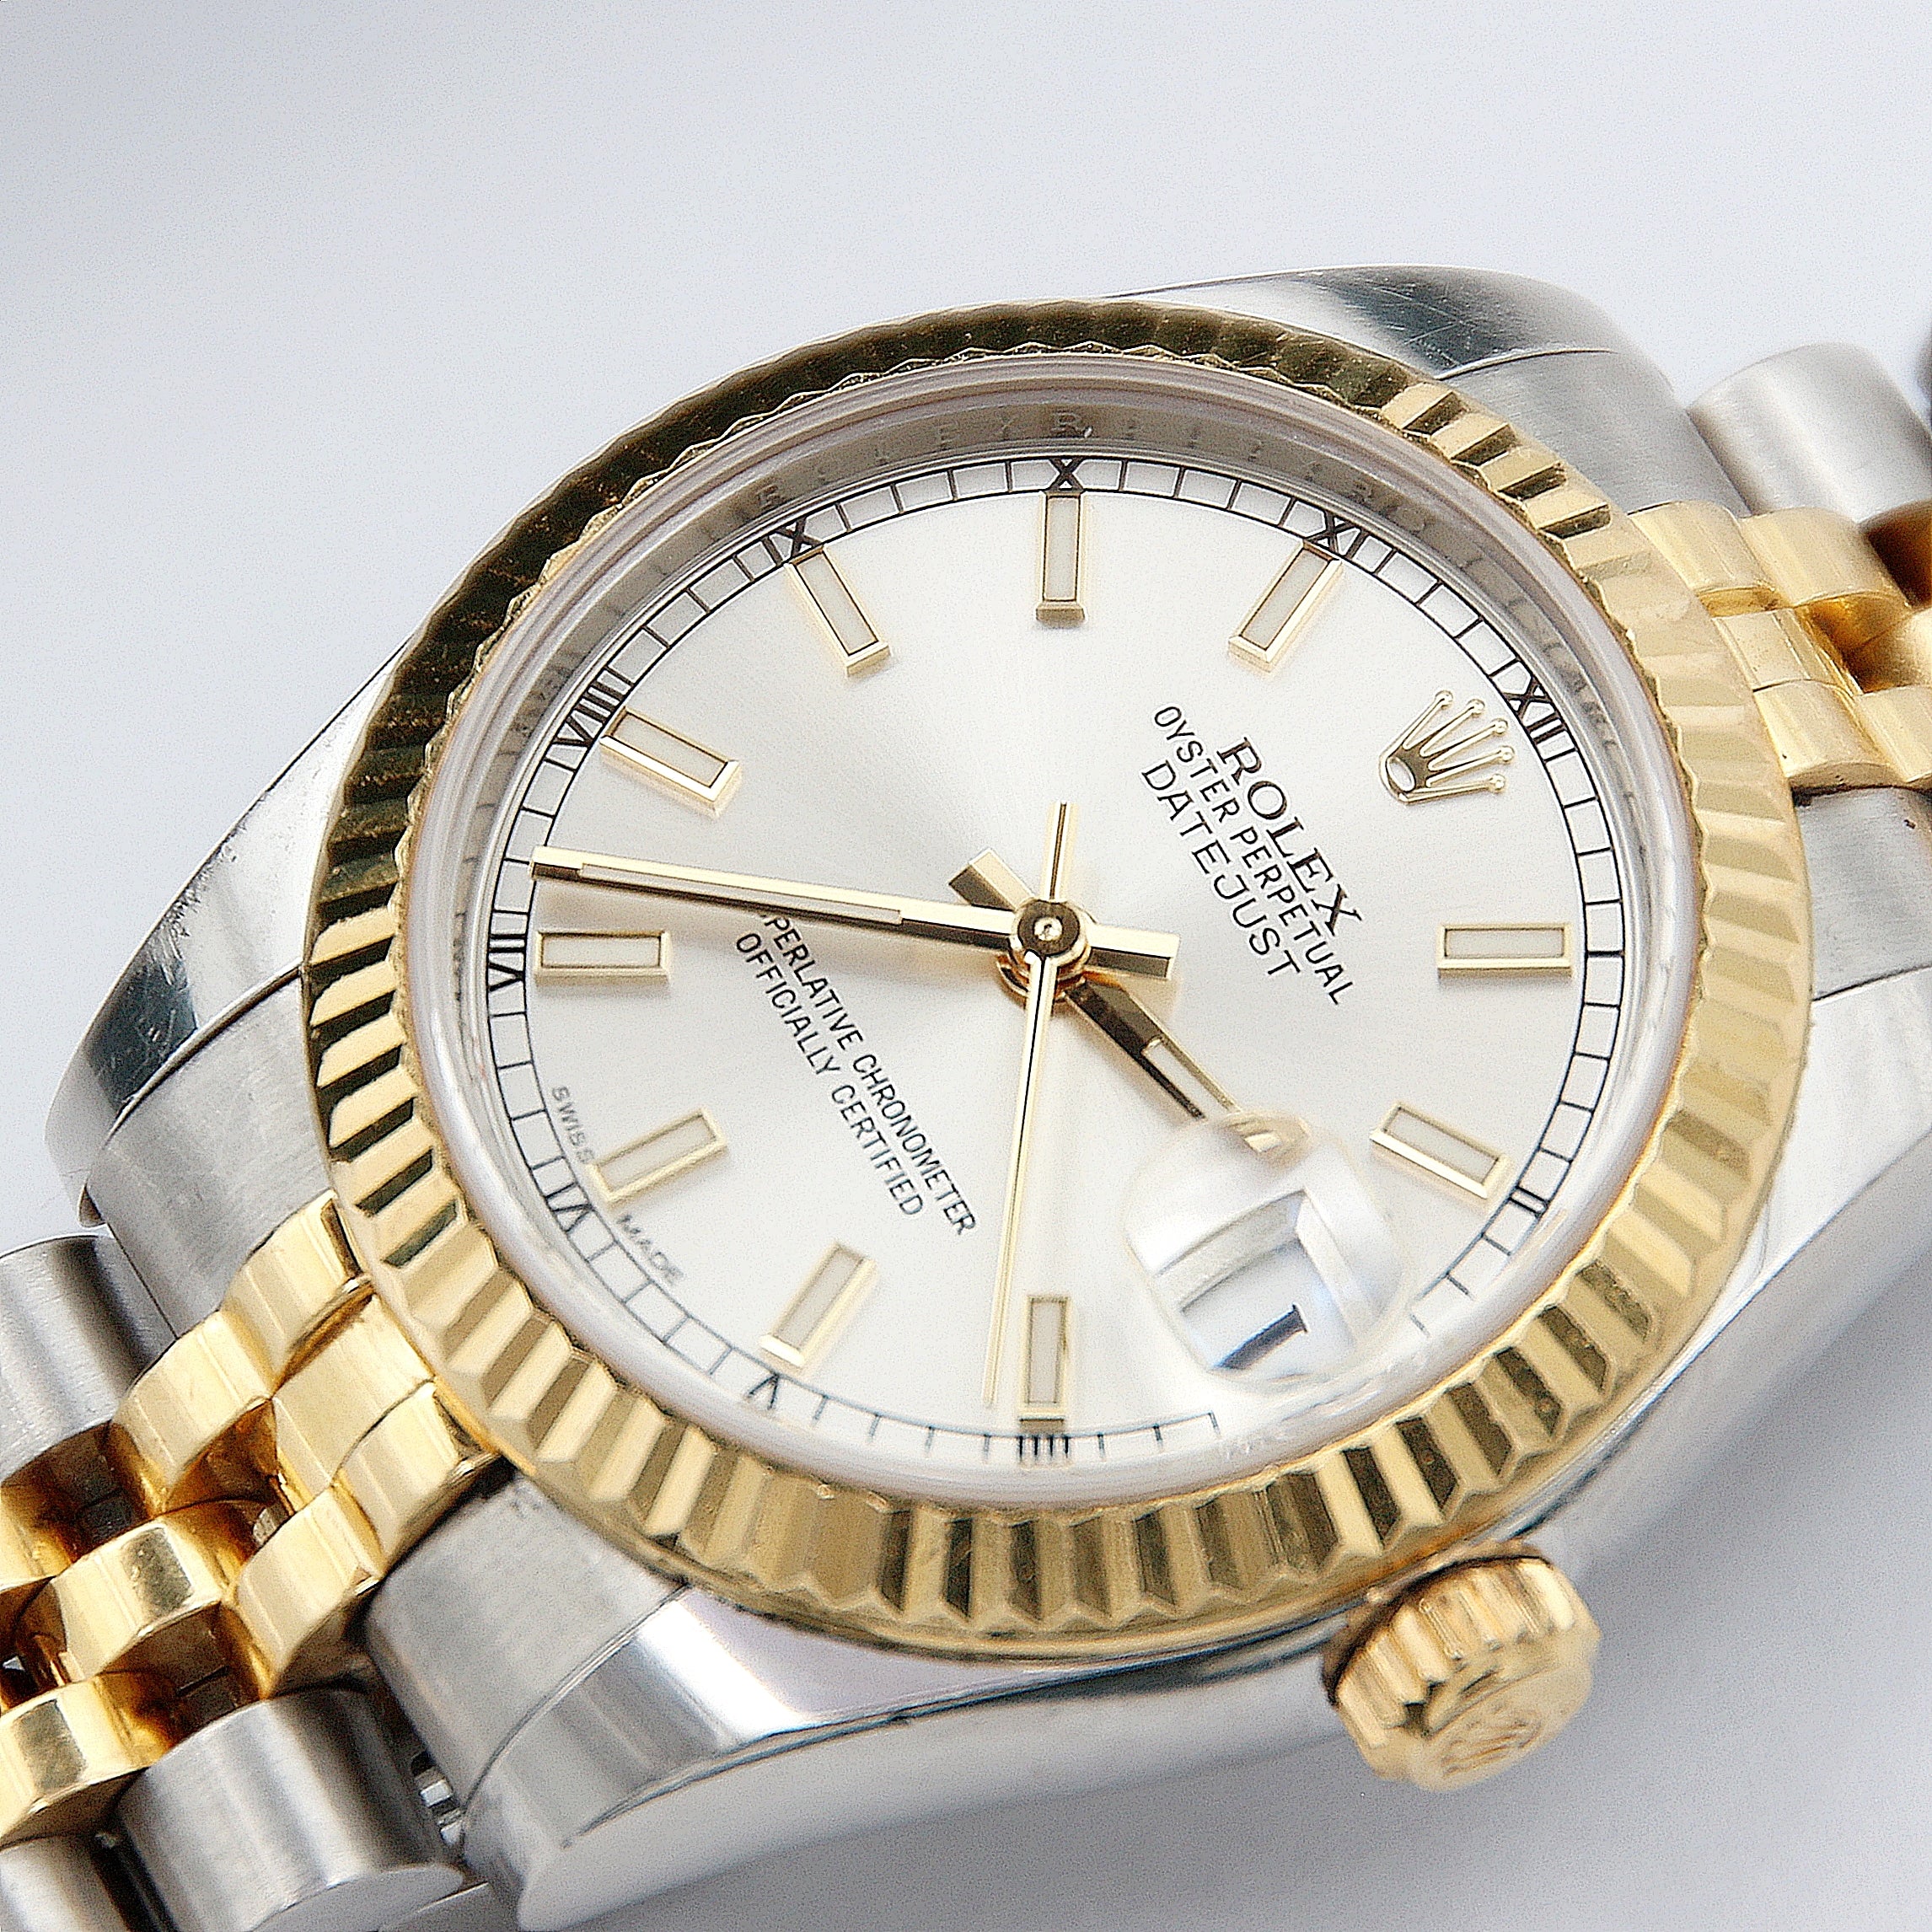 The classic watch of reference. The Rolex Datejust 31 in